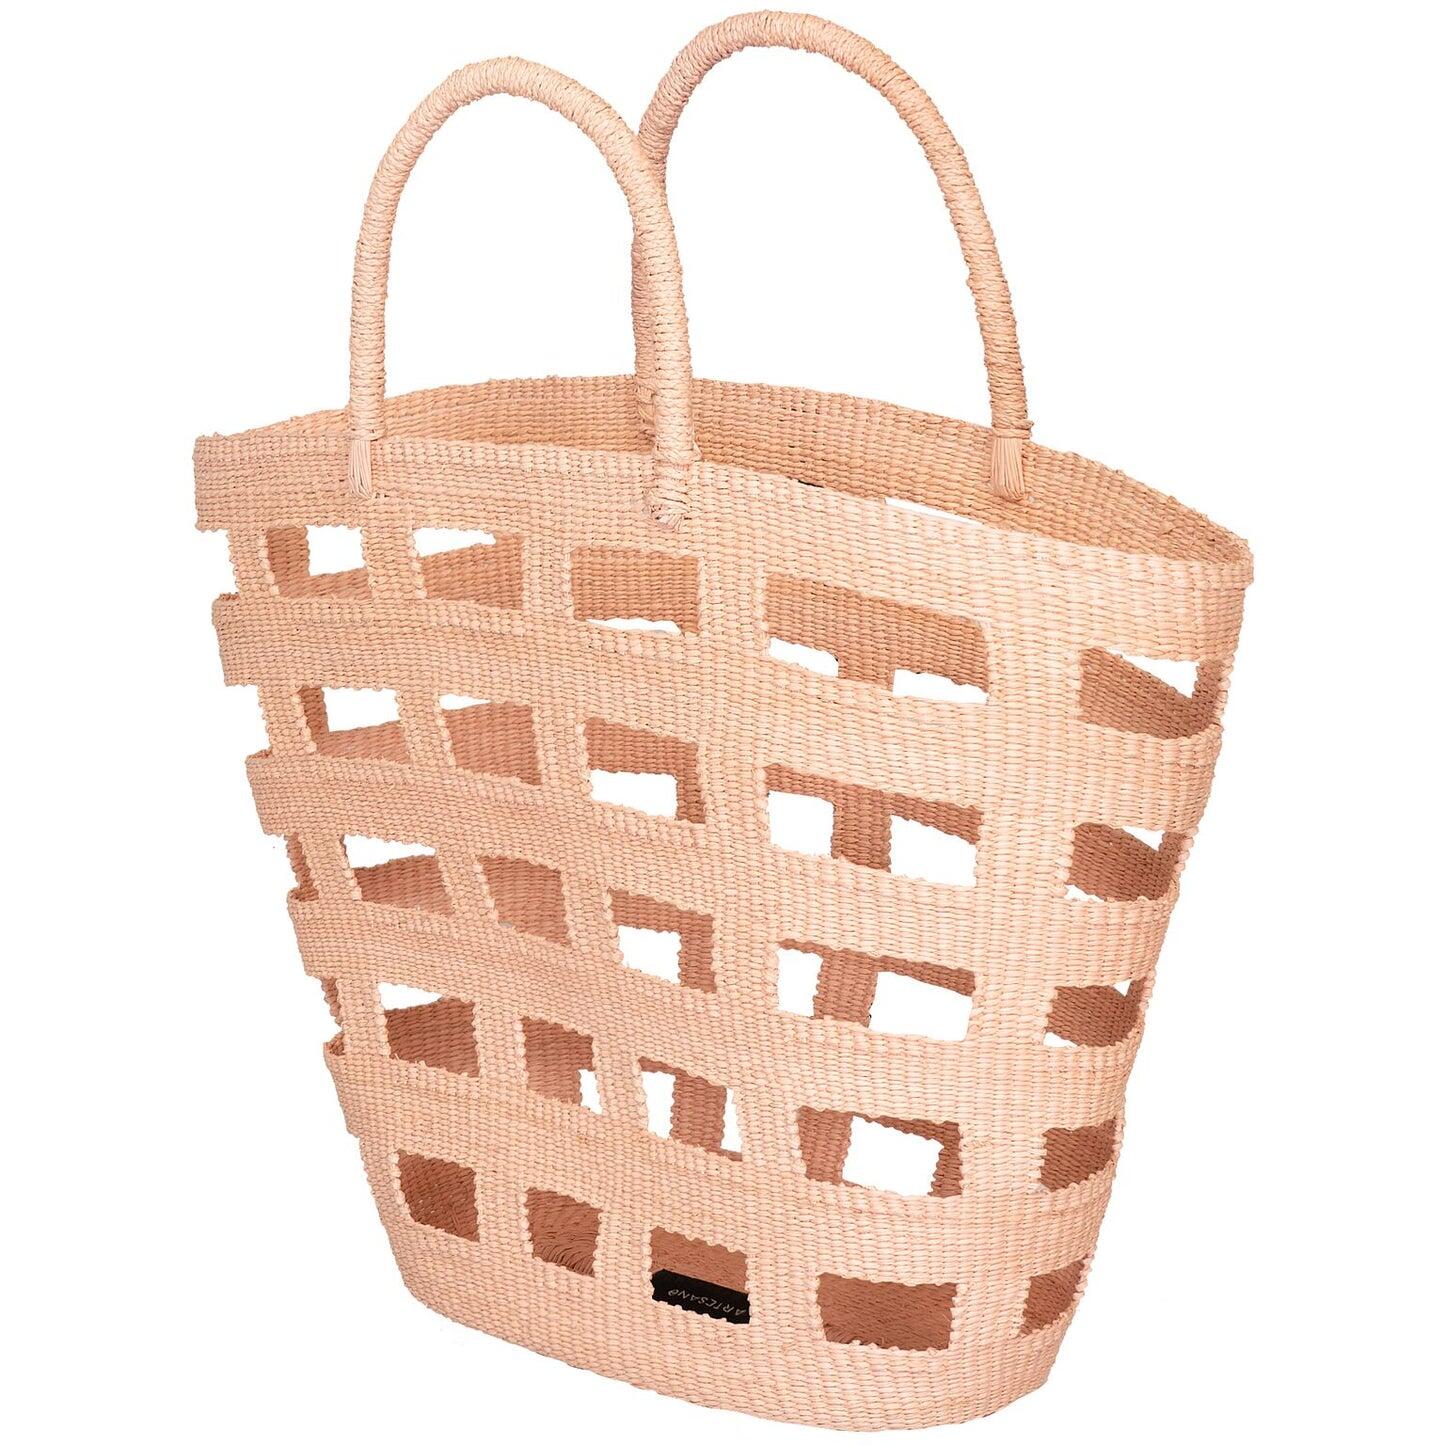 Load image into Gallery viewer, Paros Large Straw Vented Tote Bag Coral
